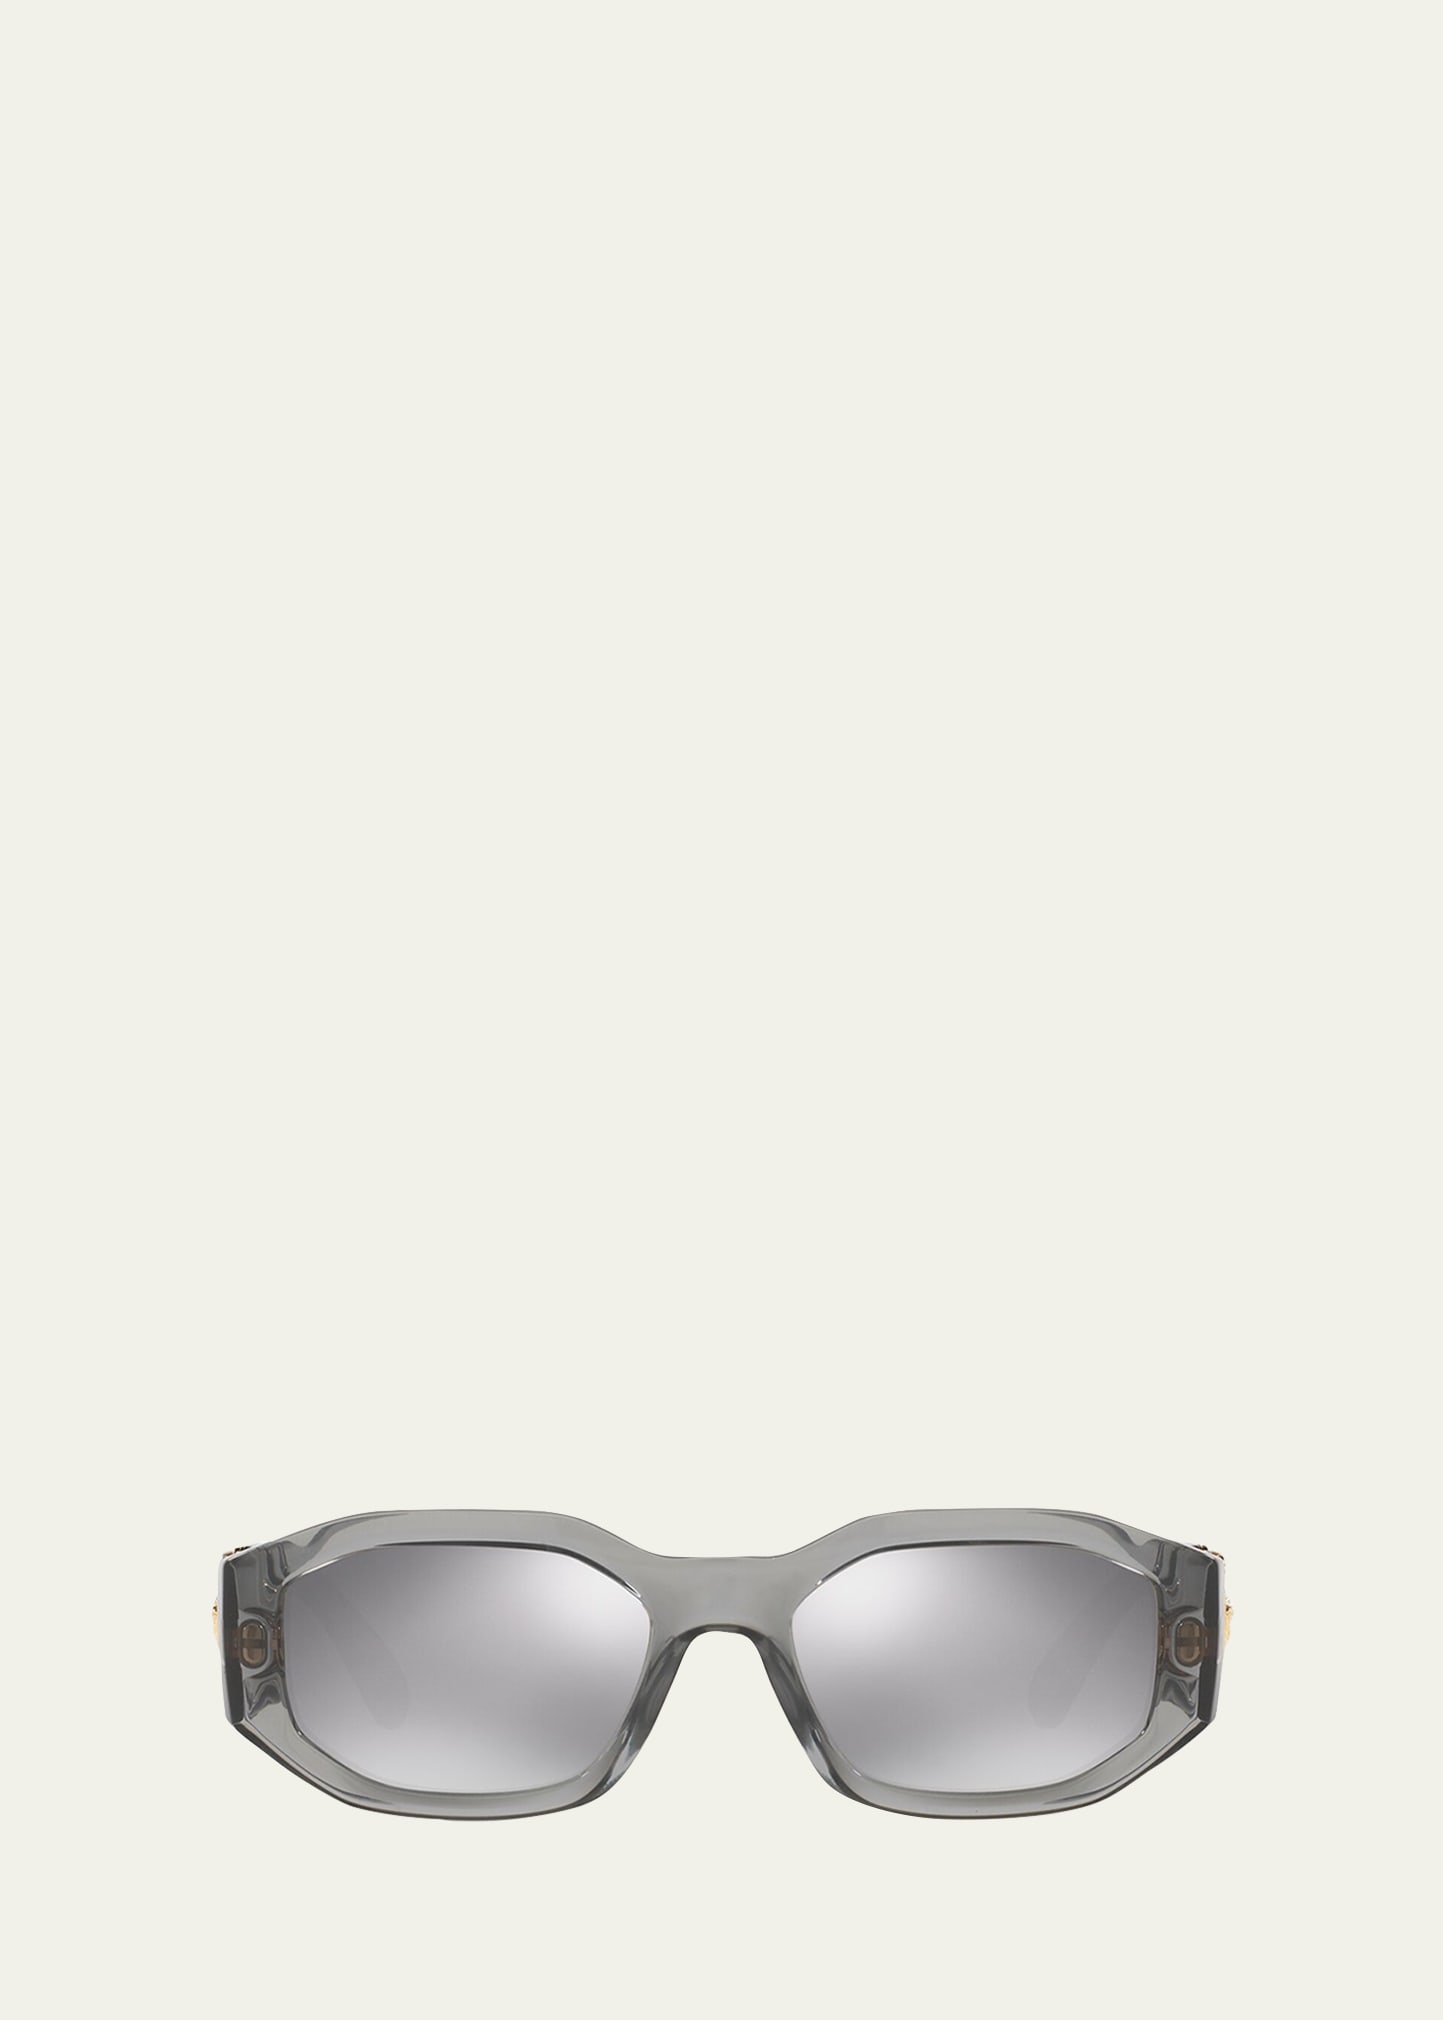 Versace Chunky Rectangle Sunglasses W/ Logo Disc Arms In Gray